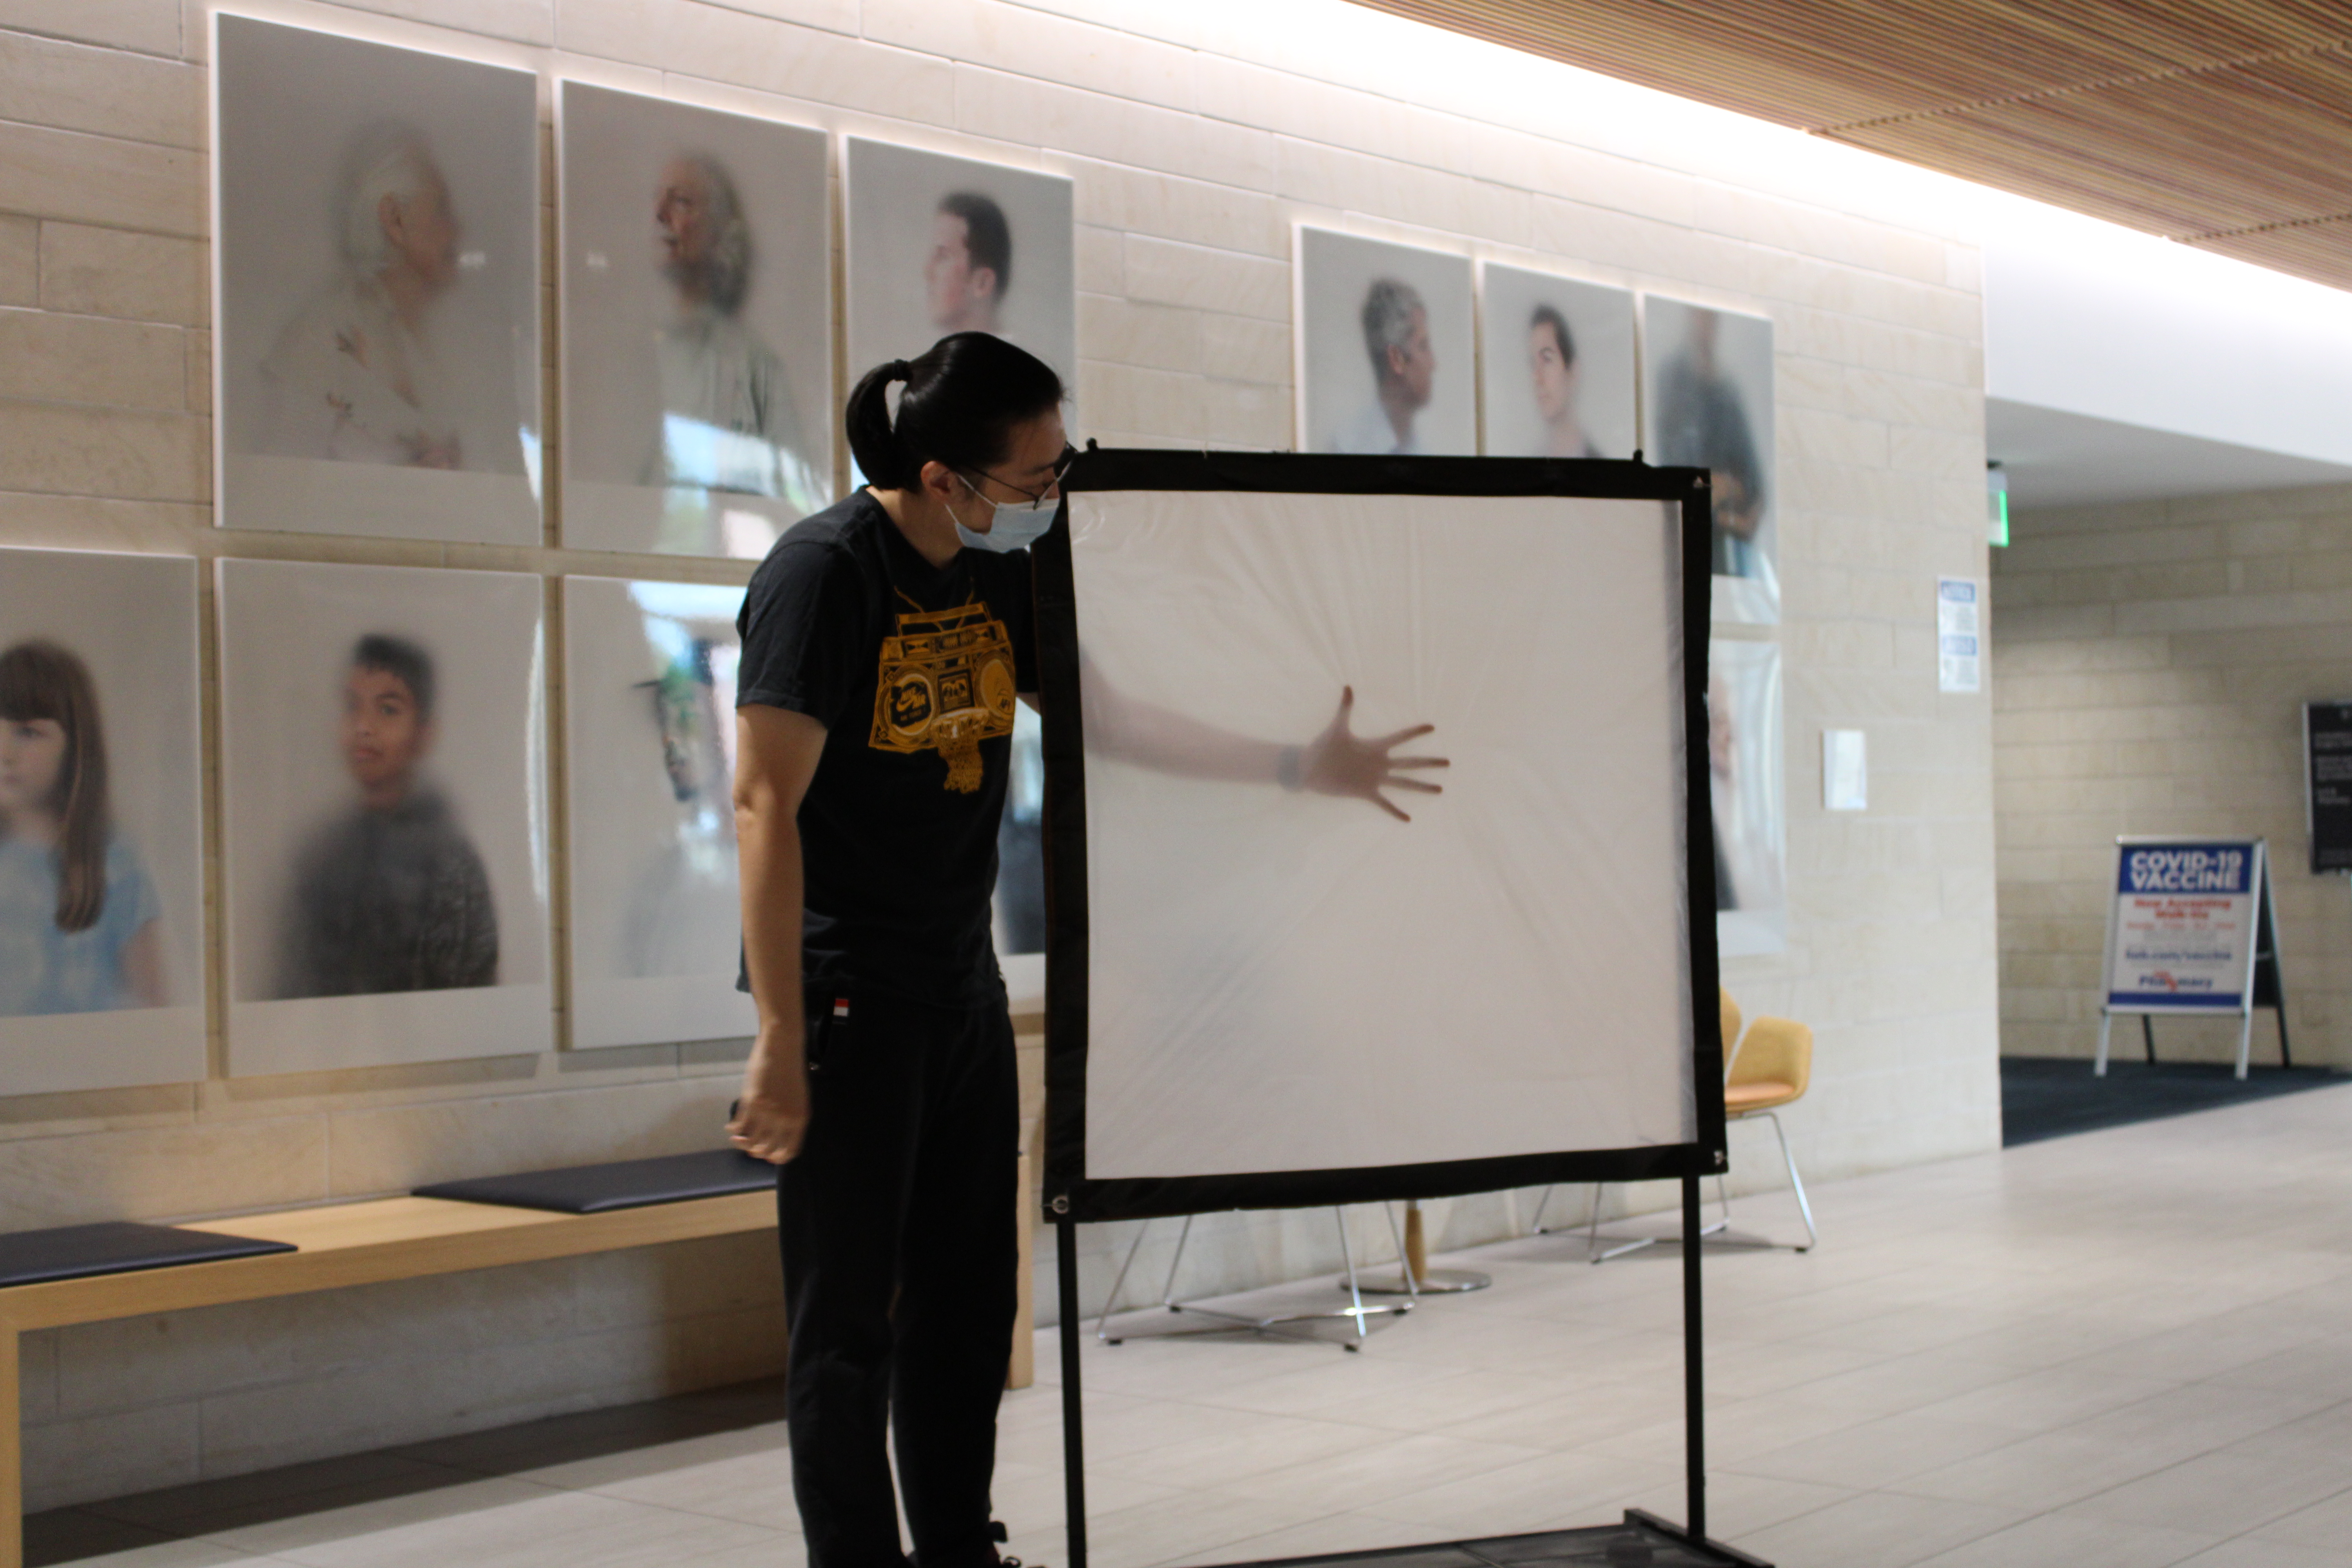 A student holds their hand behind a opaque screen which resembles Ann Hamilton's process in "ONEEVERYONE"